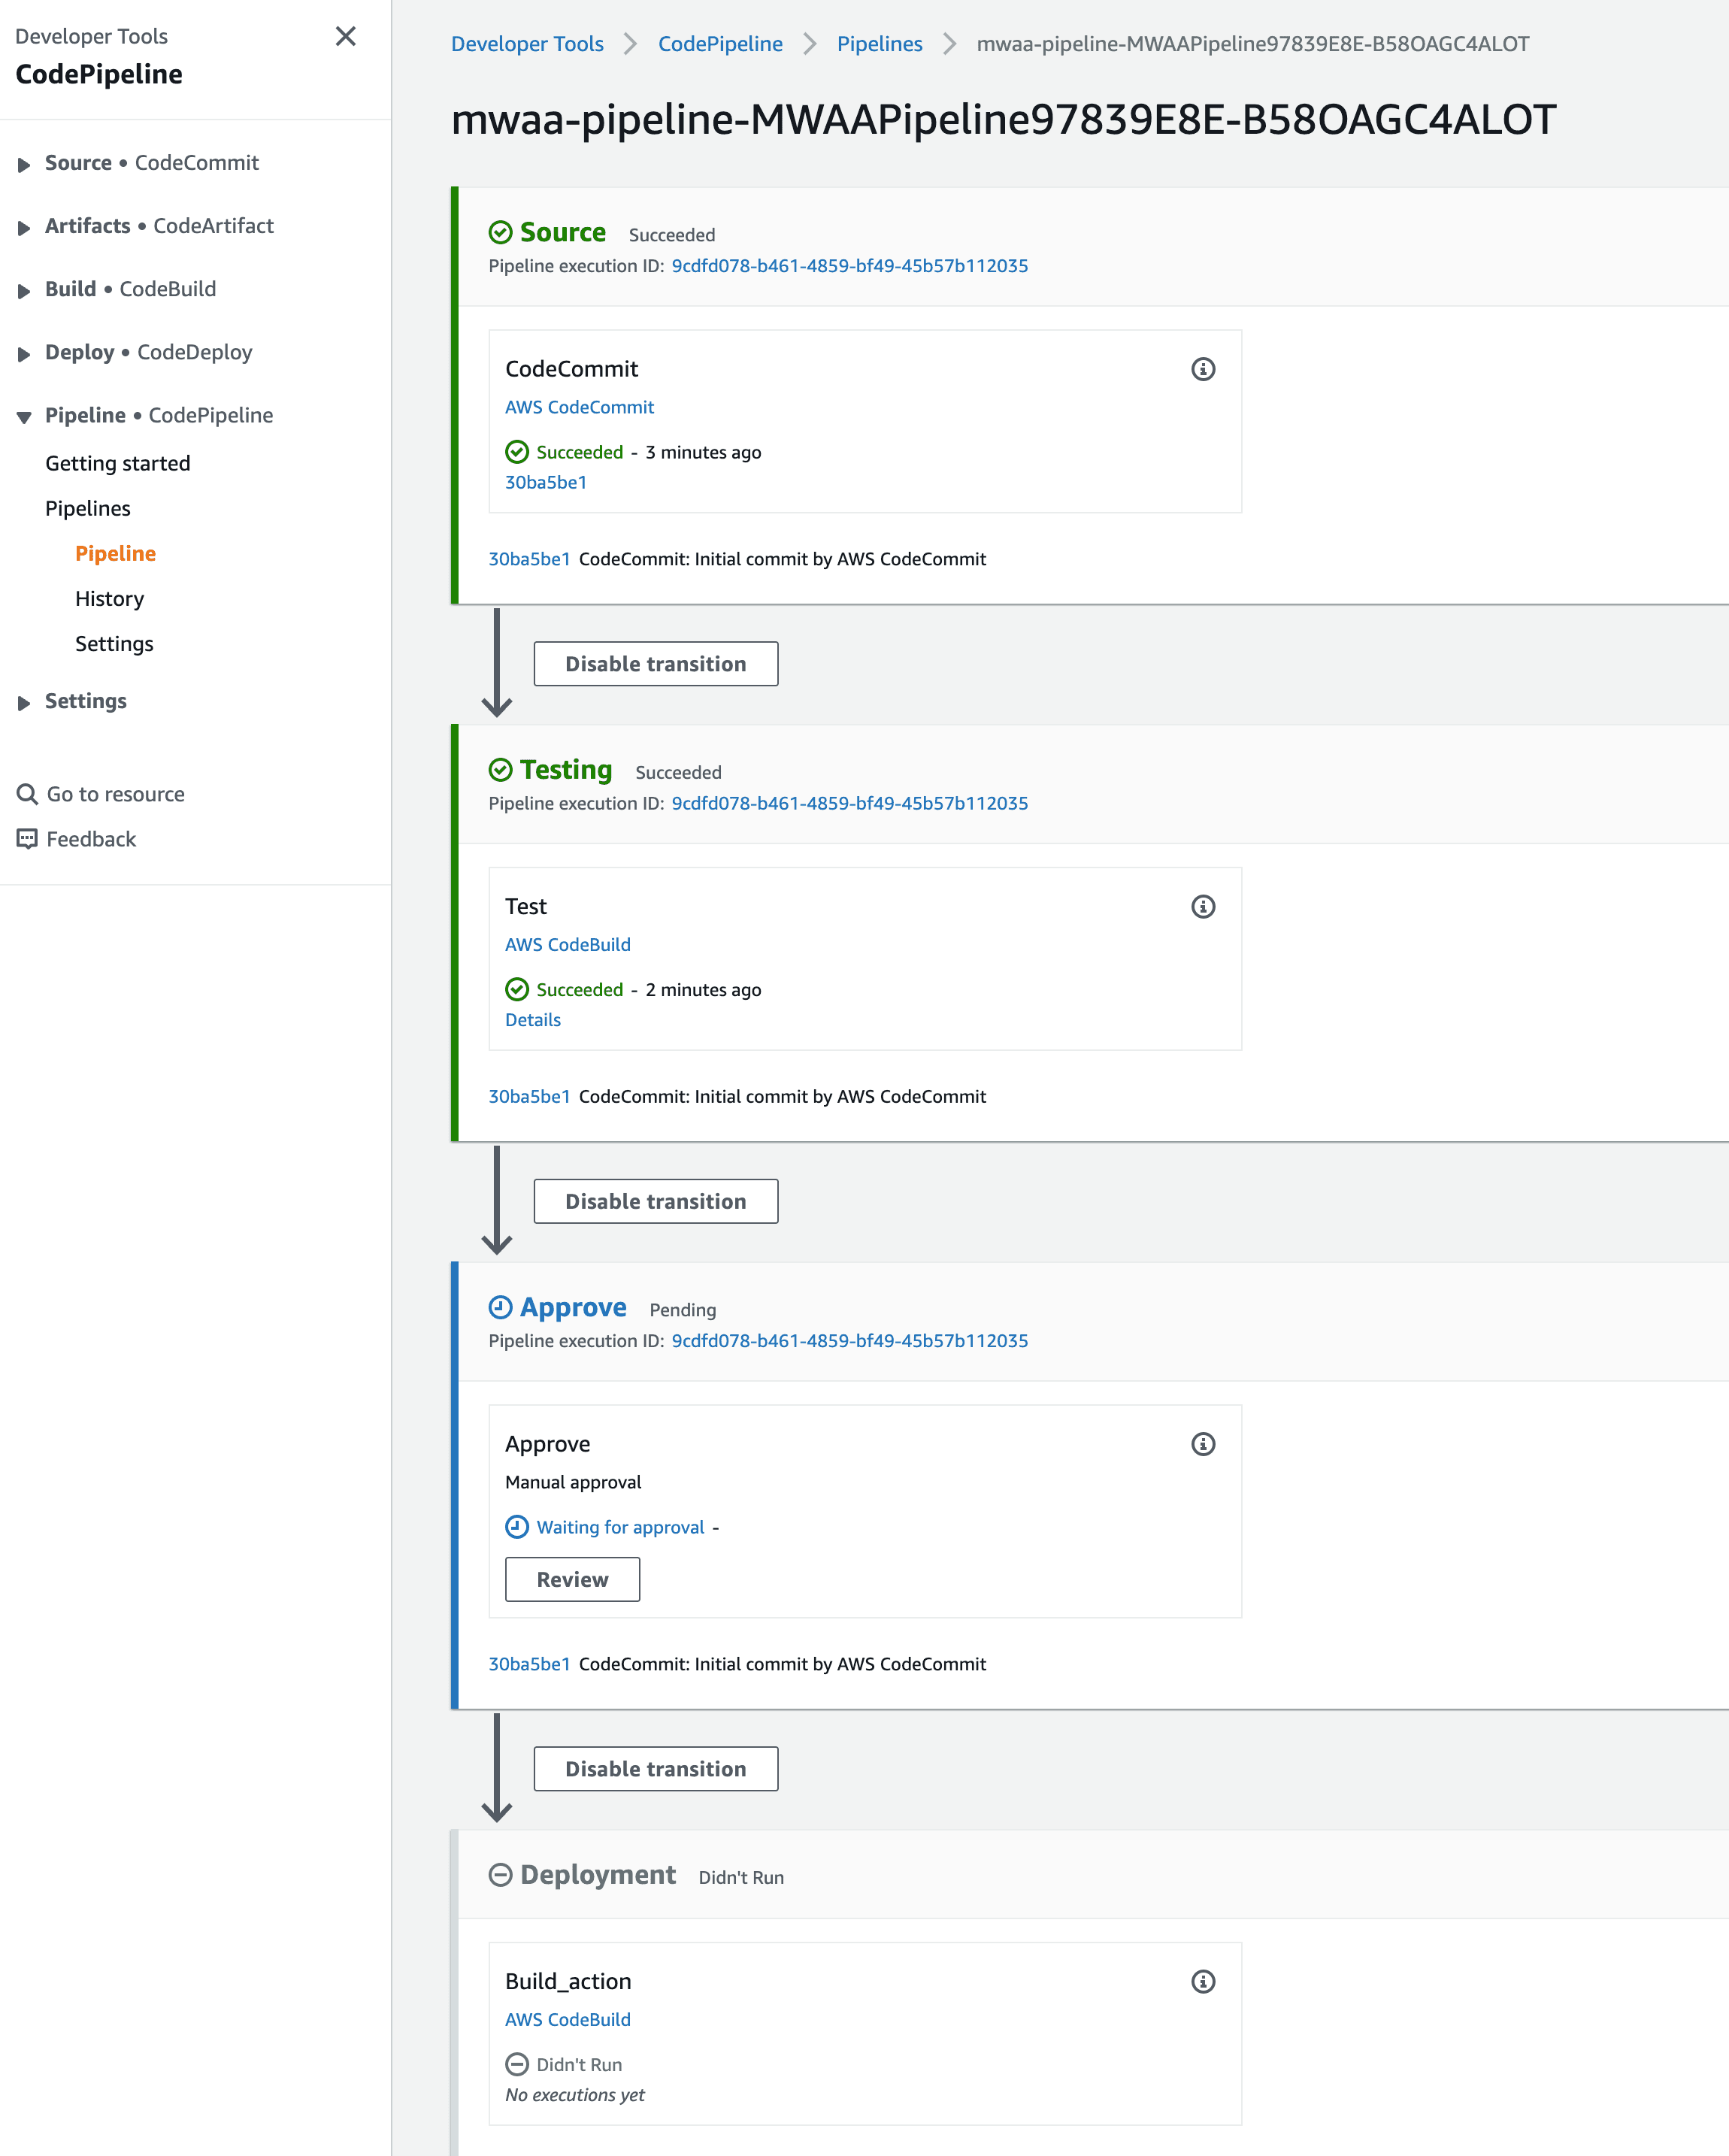 Sample screen from codepipeline that shows waiting for approval